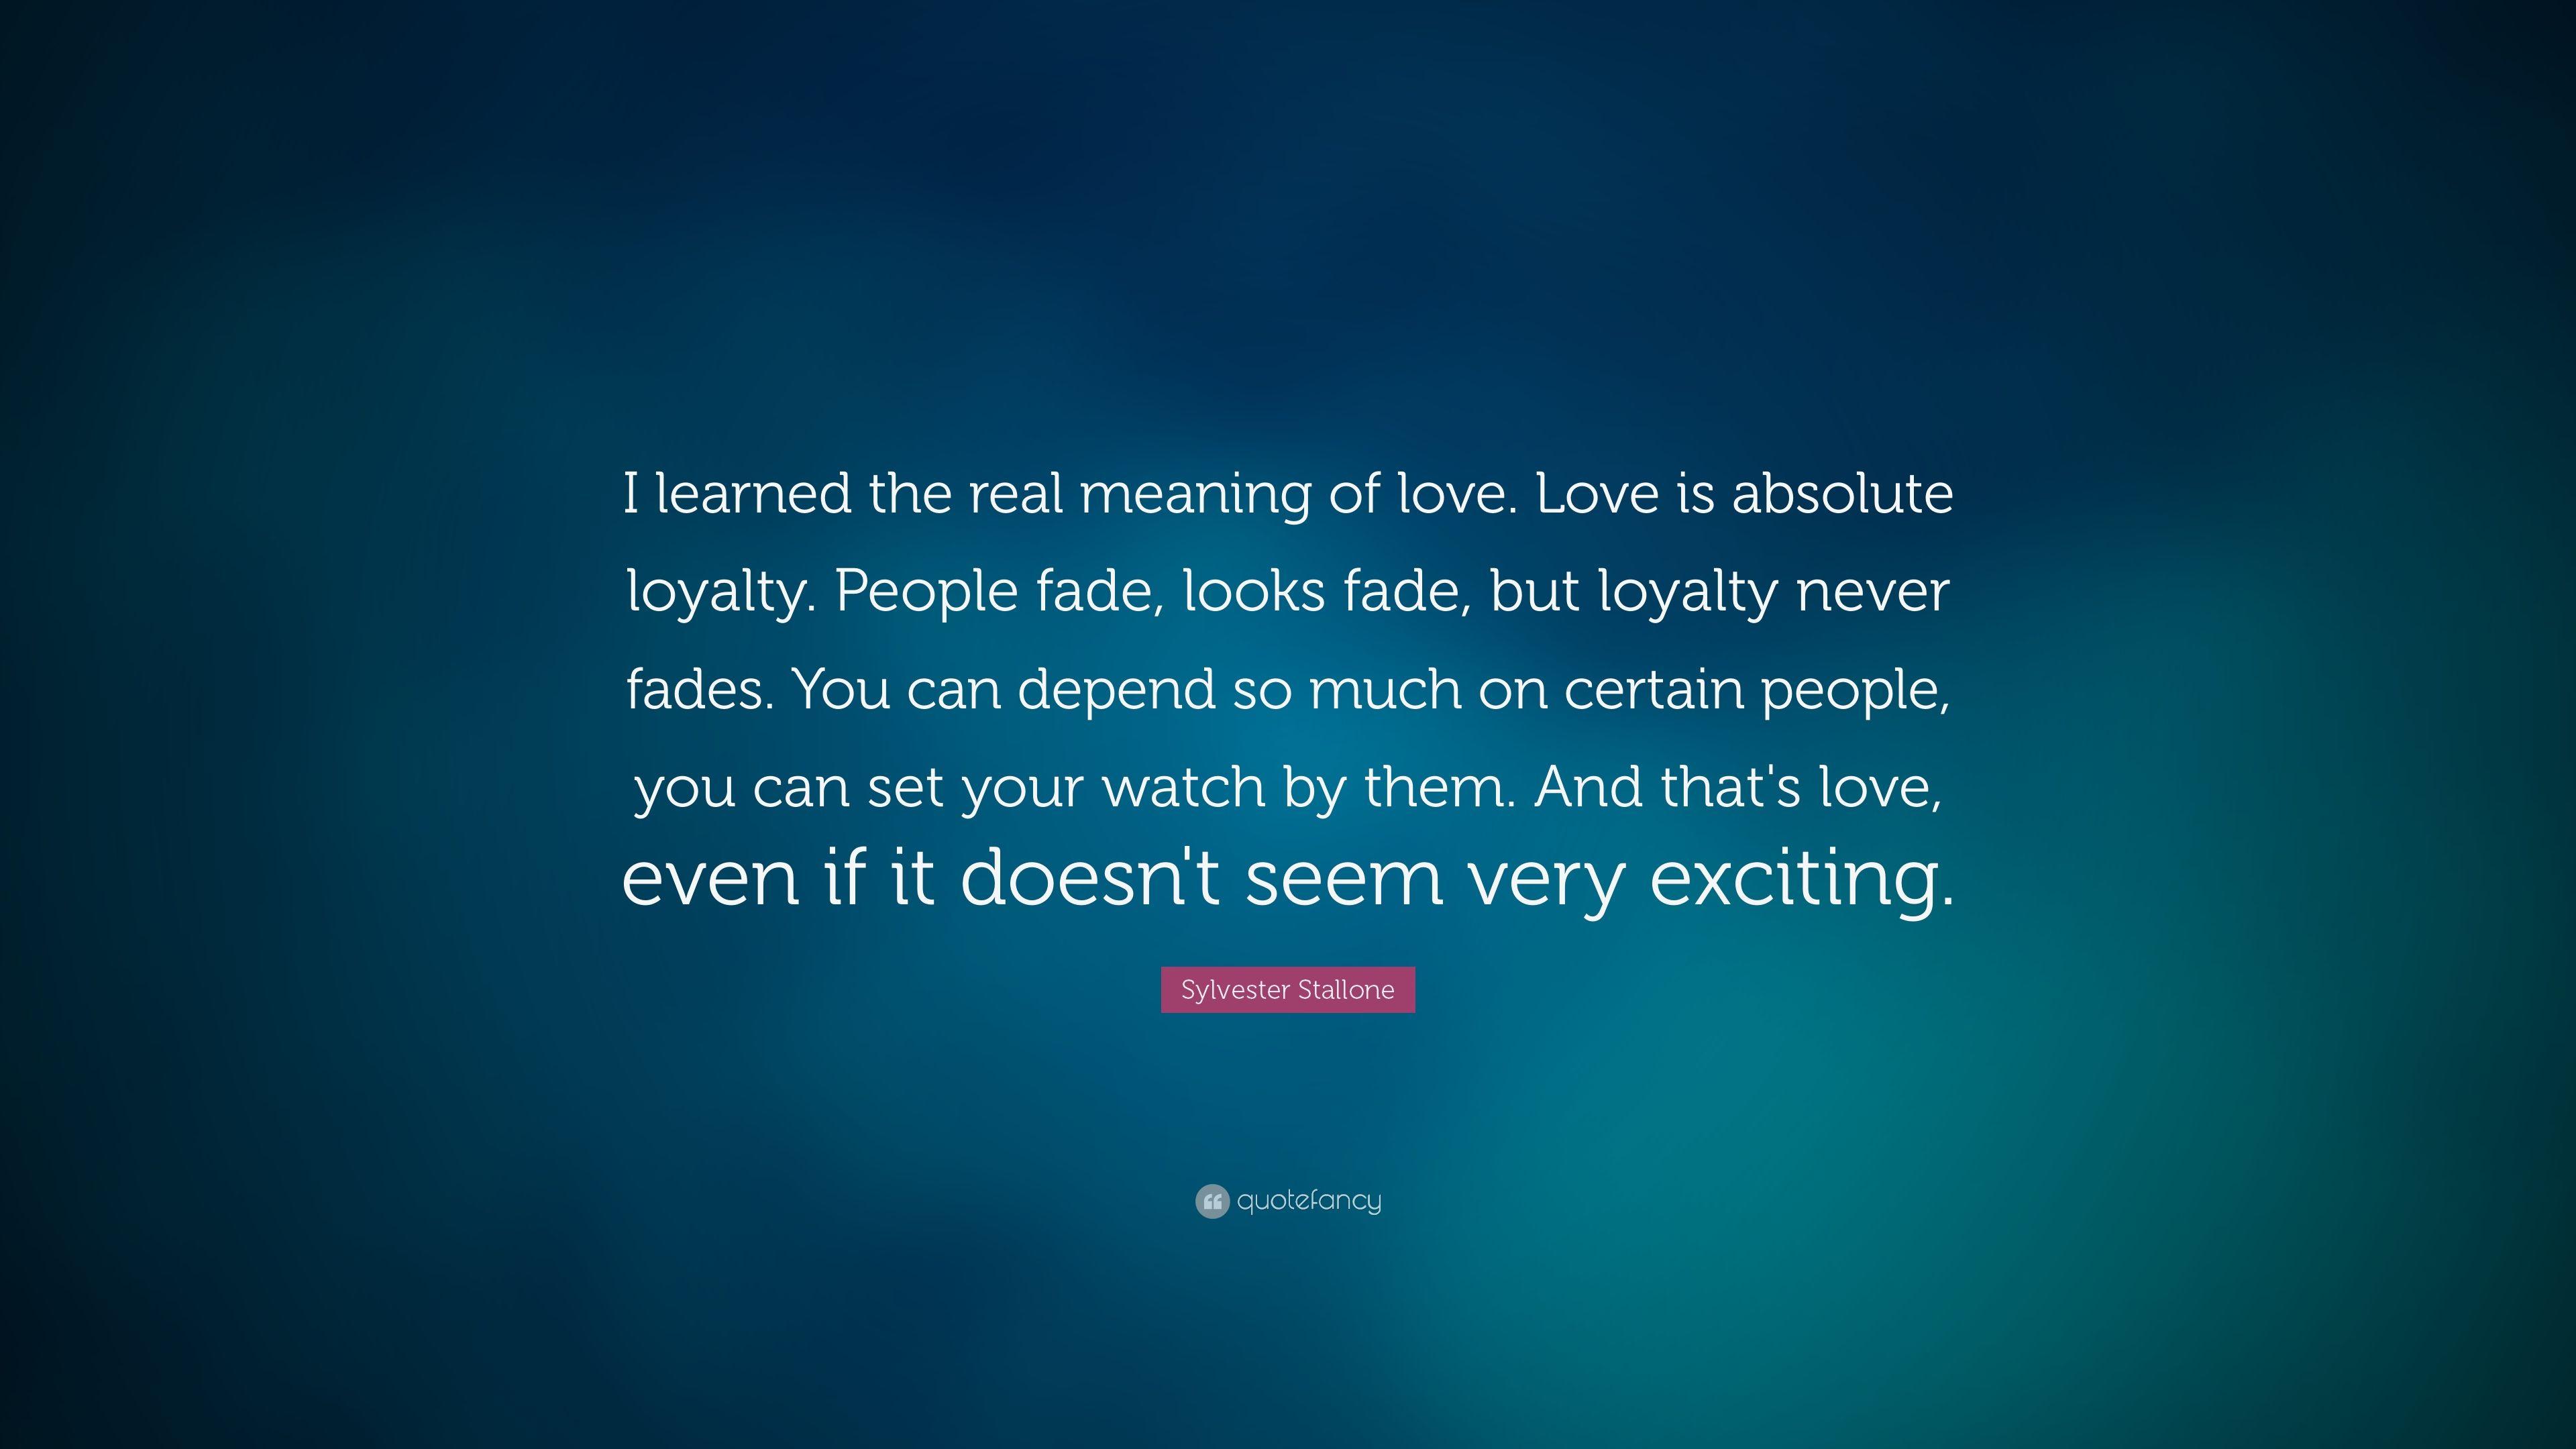 Sylvester Stallone Quote: “I learned the real meaning of love. Love